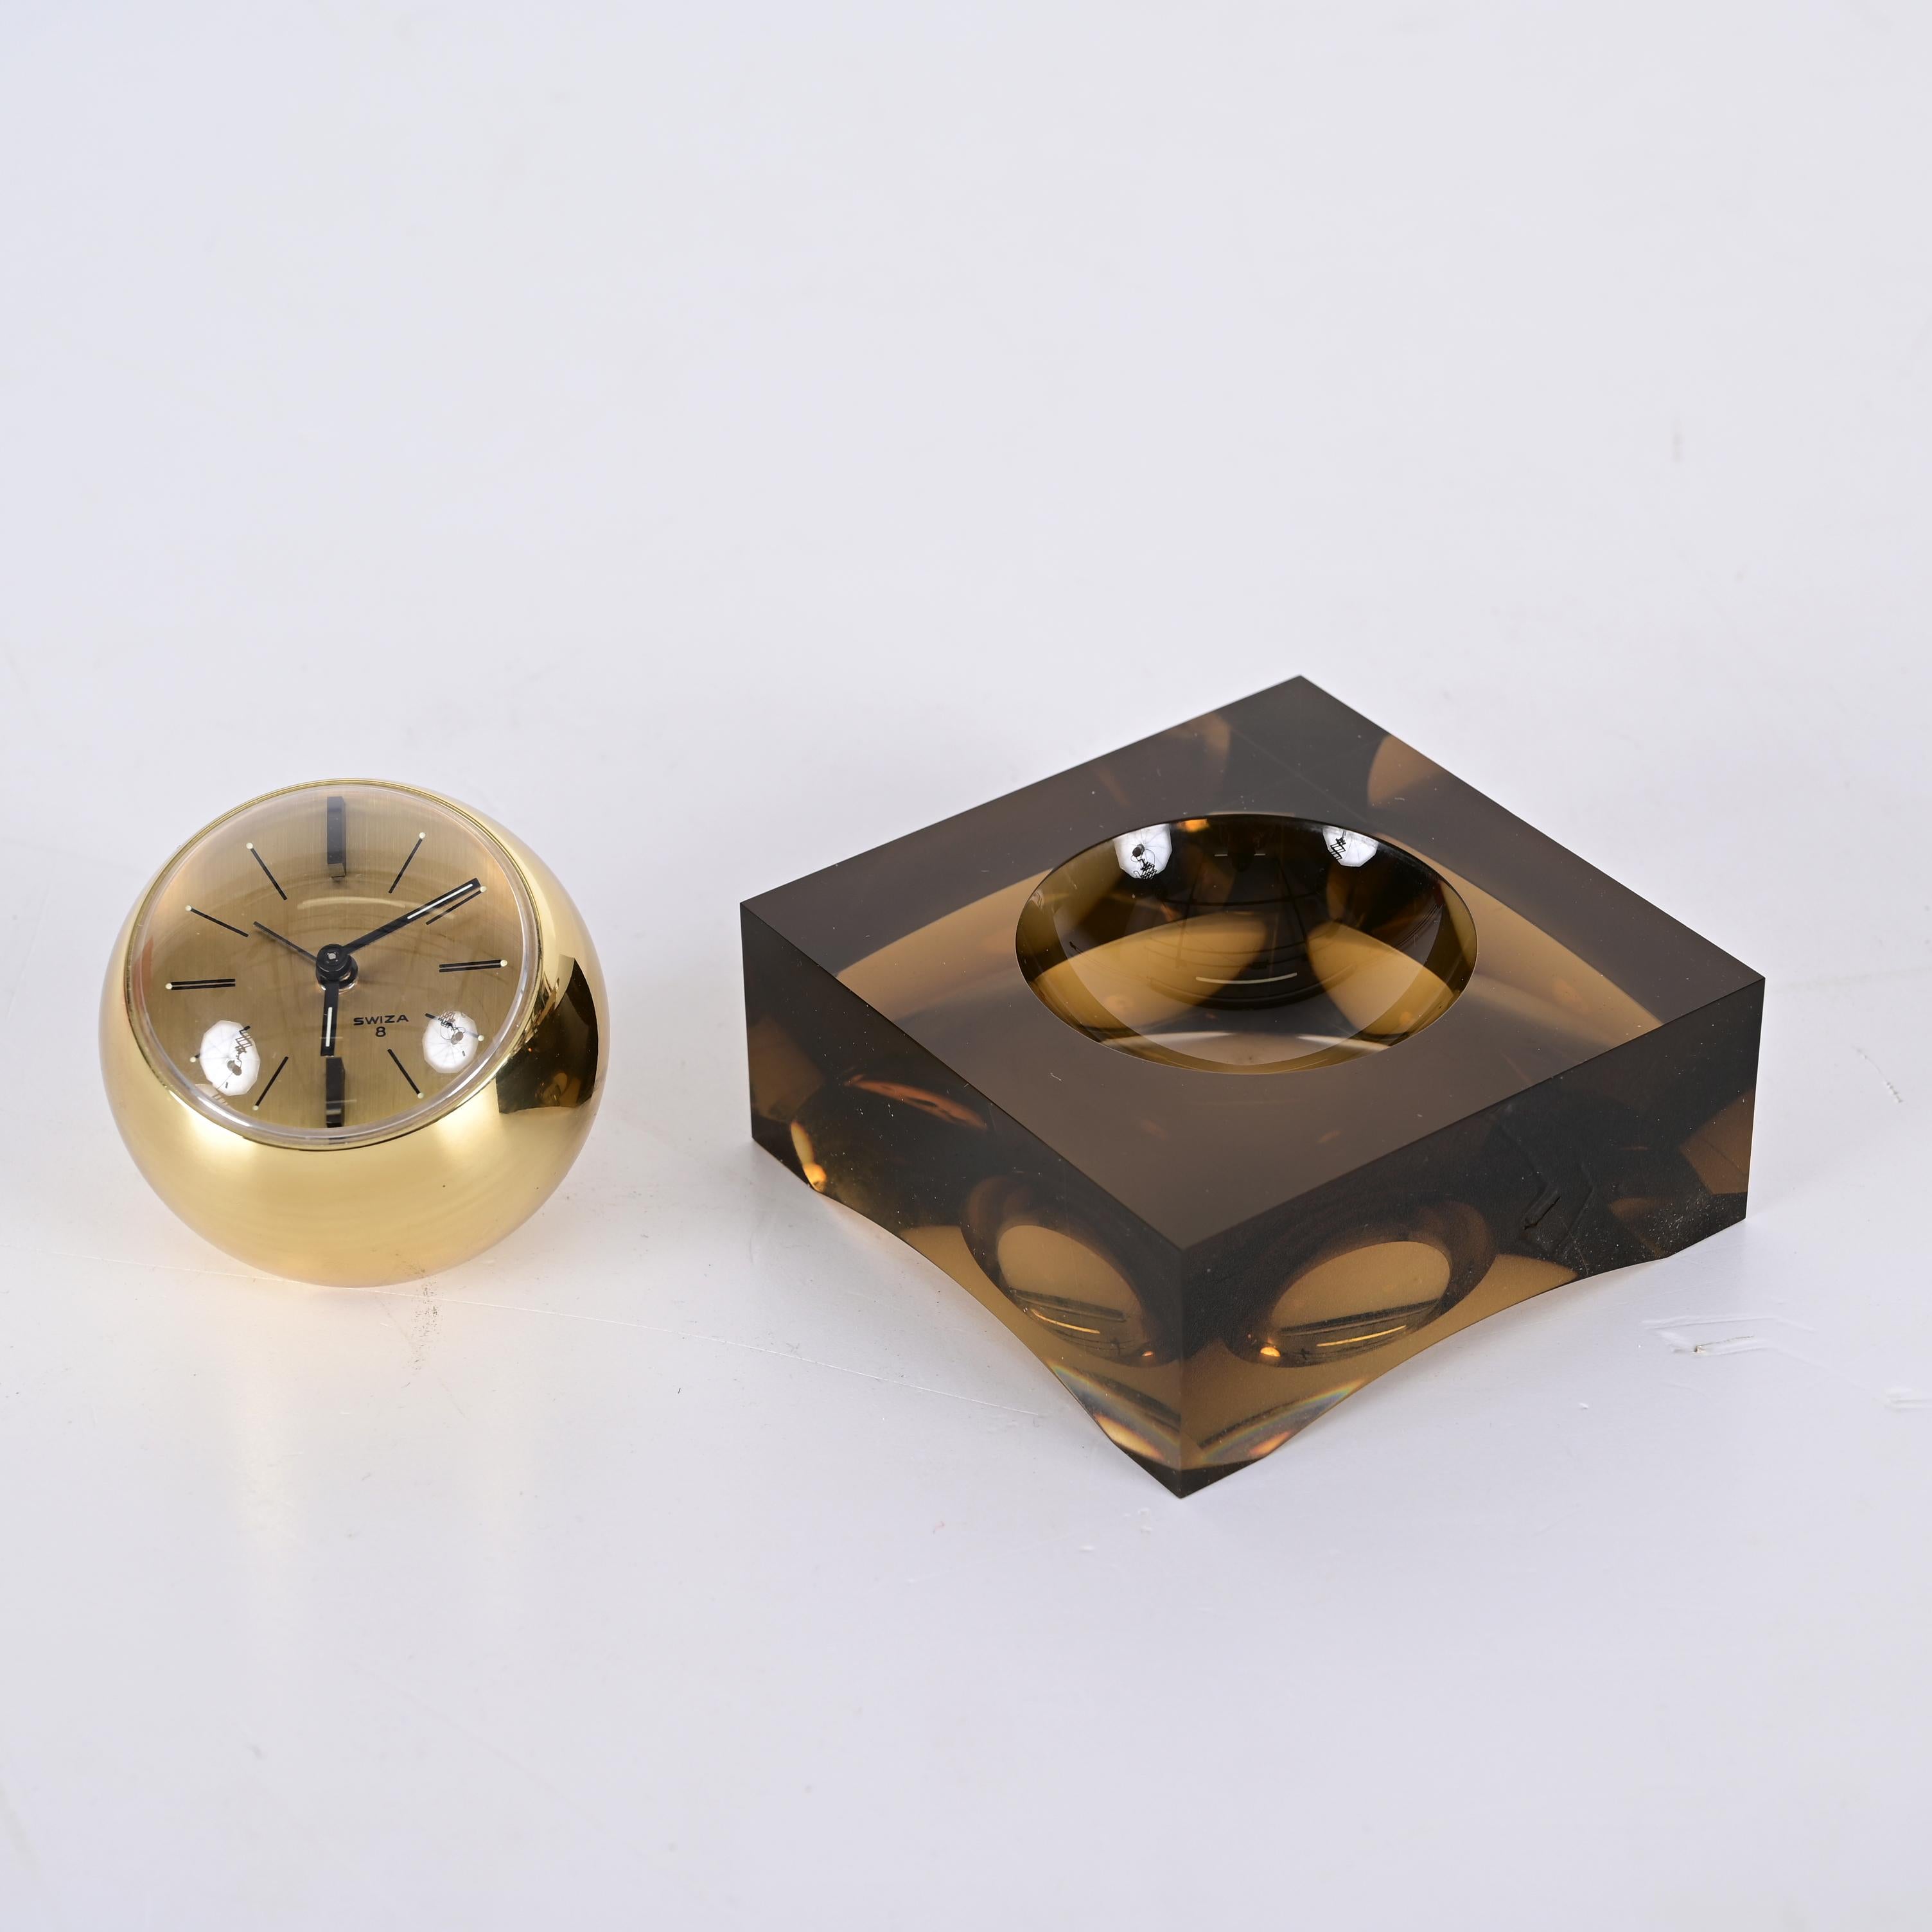 Swiza 8 Day Rare Gilt Sphere Clock with Smoked Lucite Base, Box and Guarantee For Sale 2